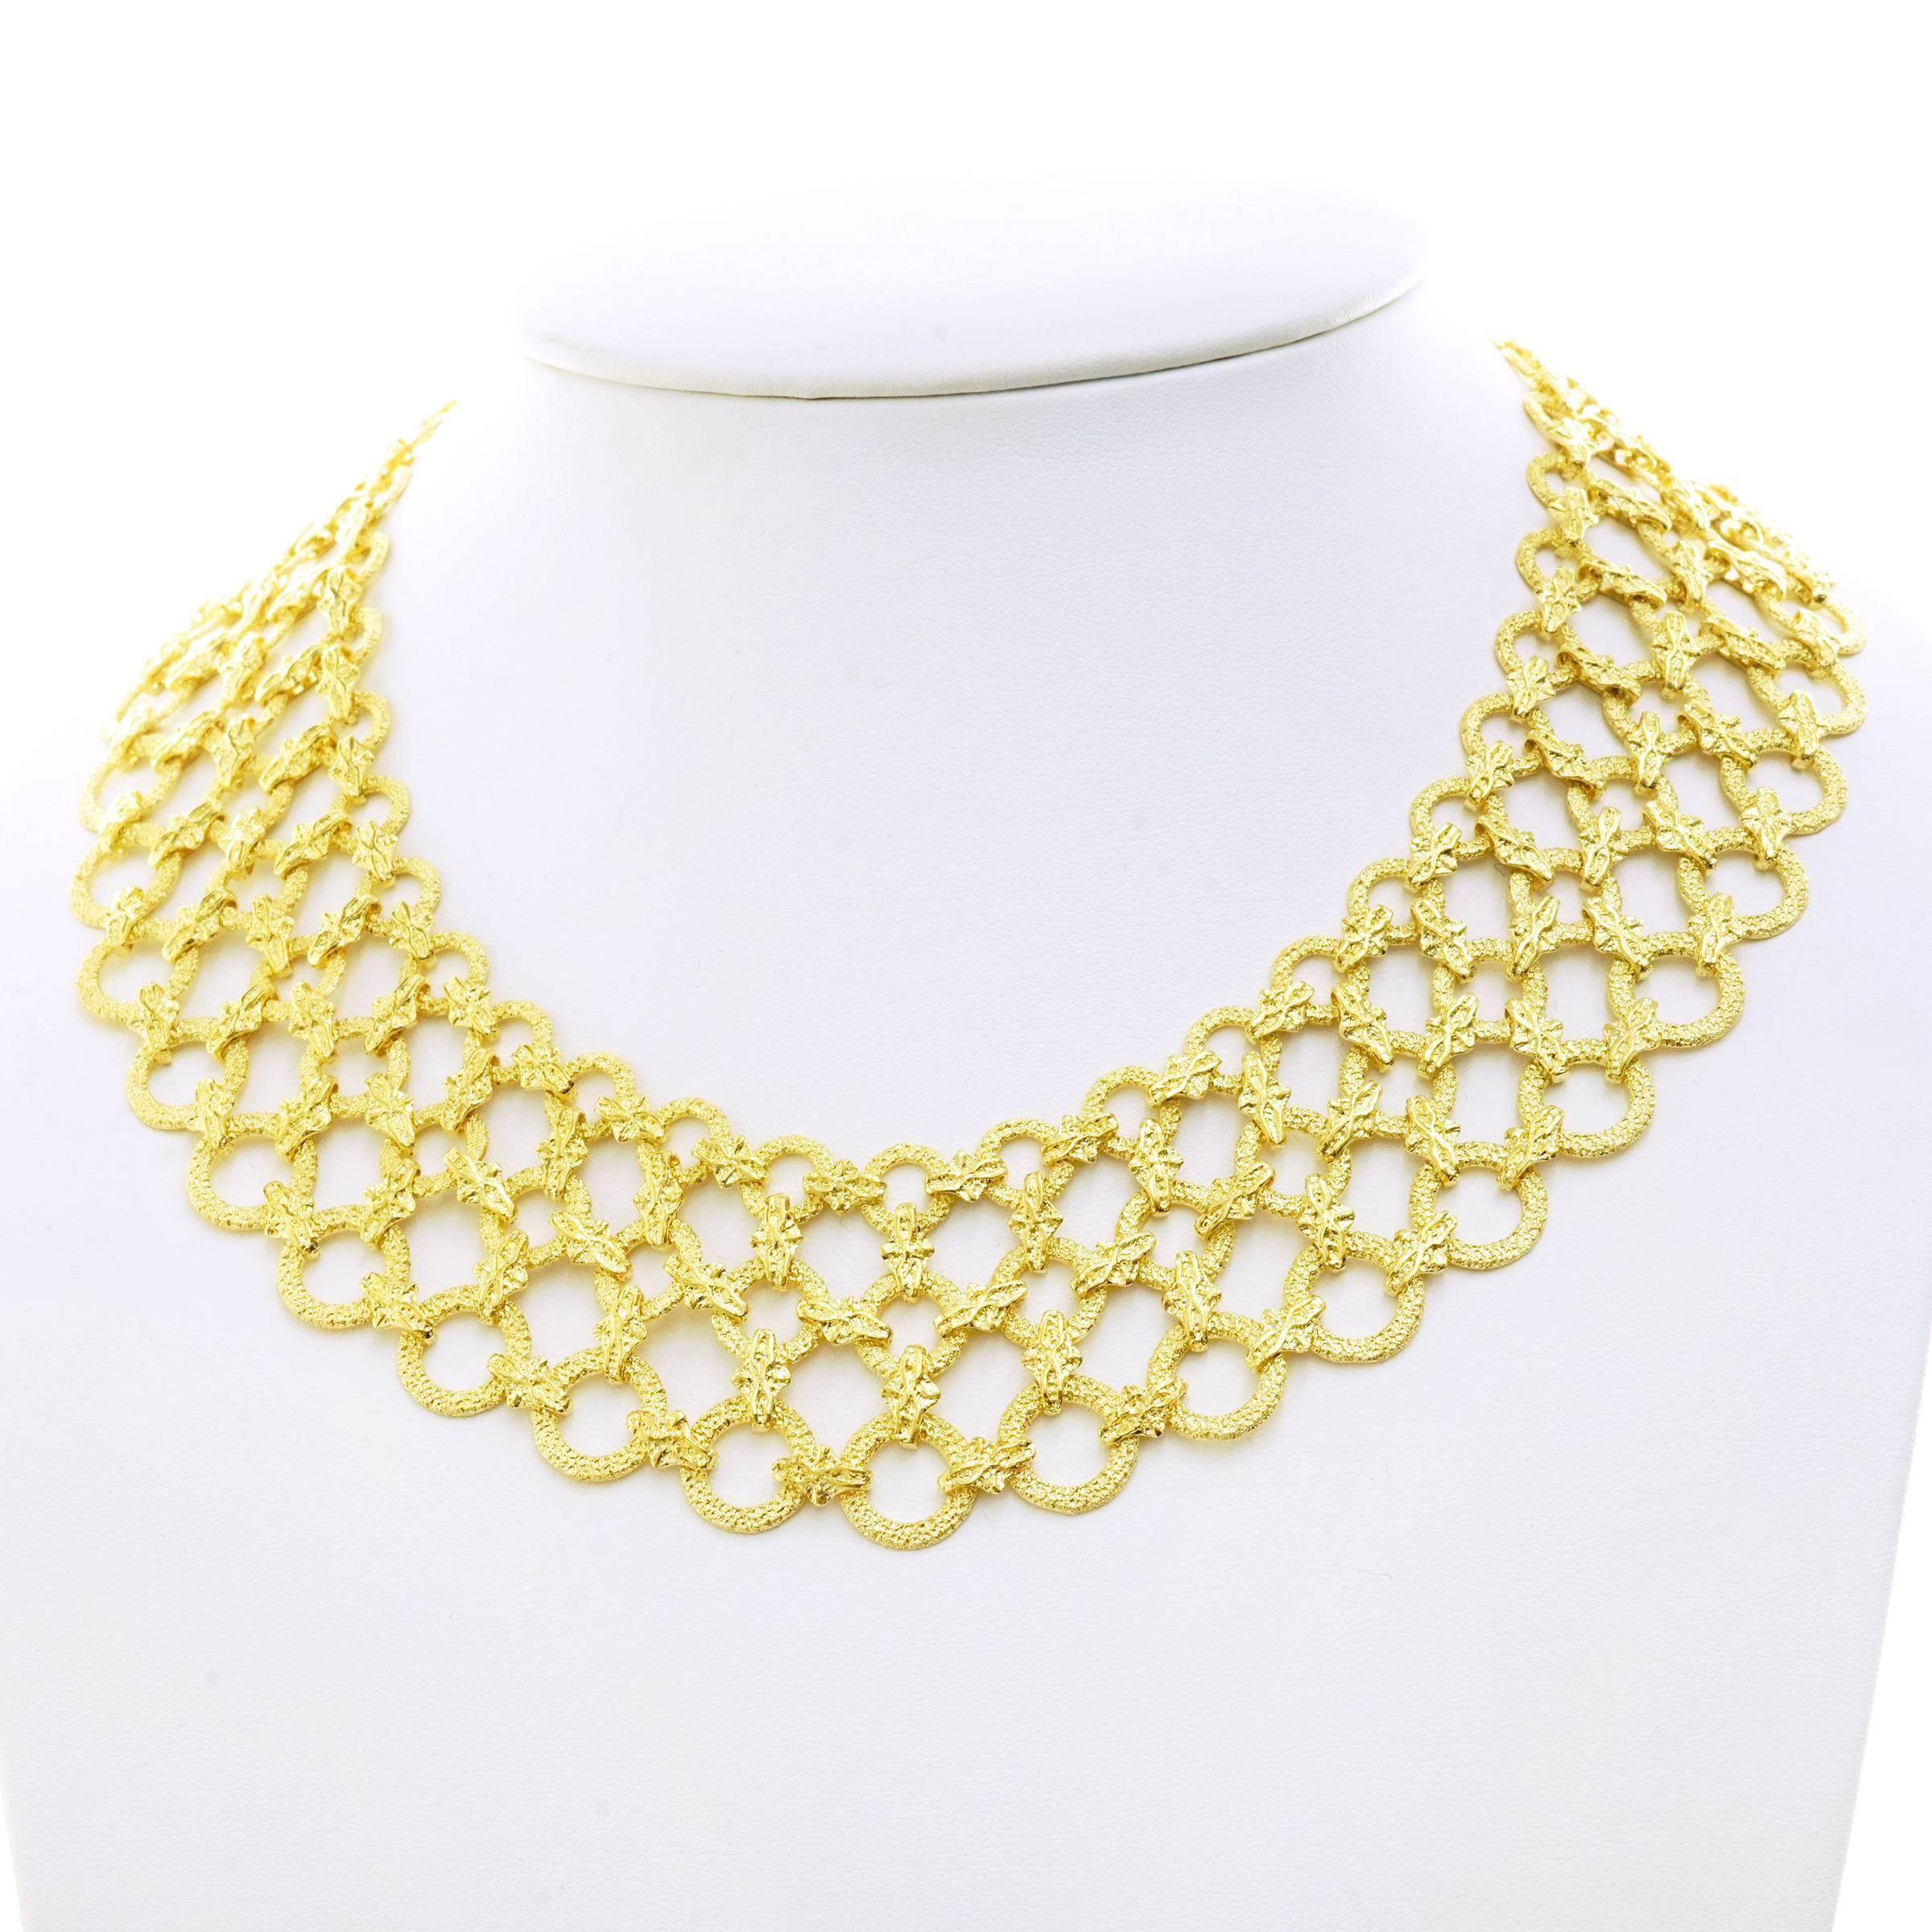 1970s Mod Gold Collar Necklace 4